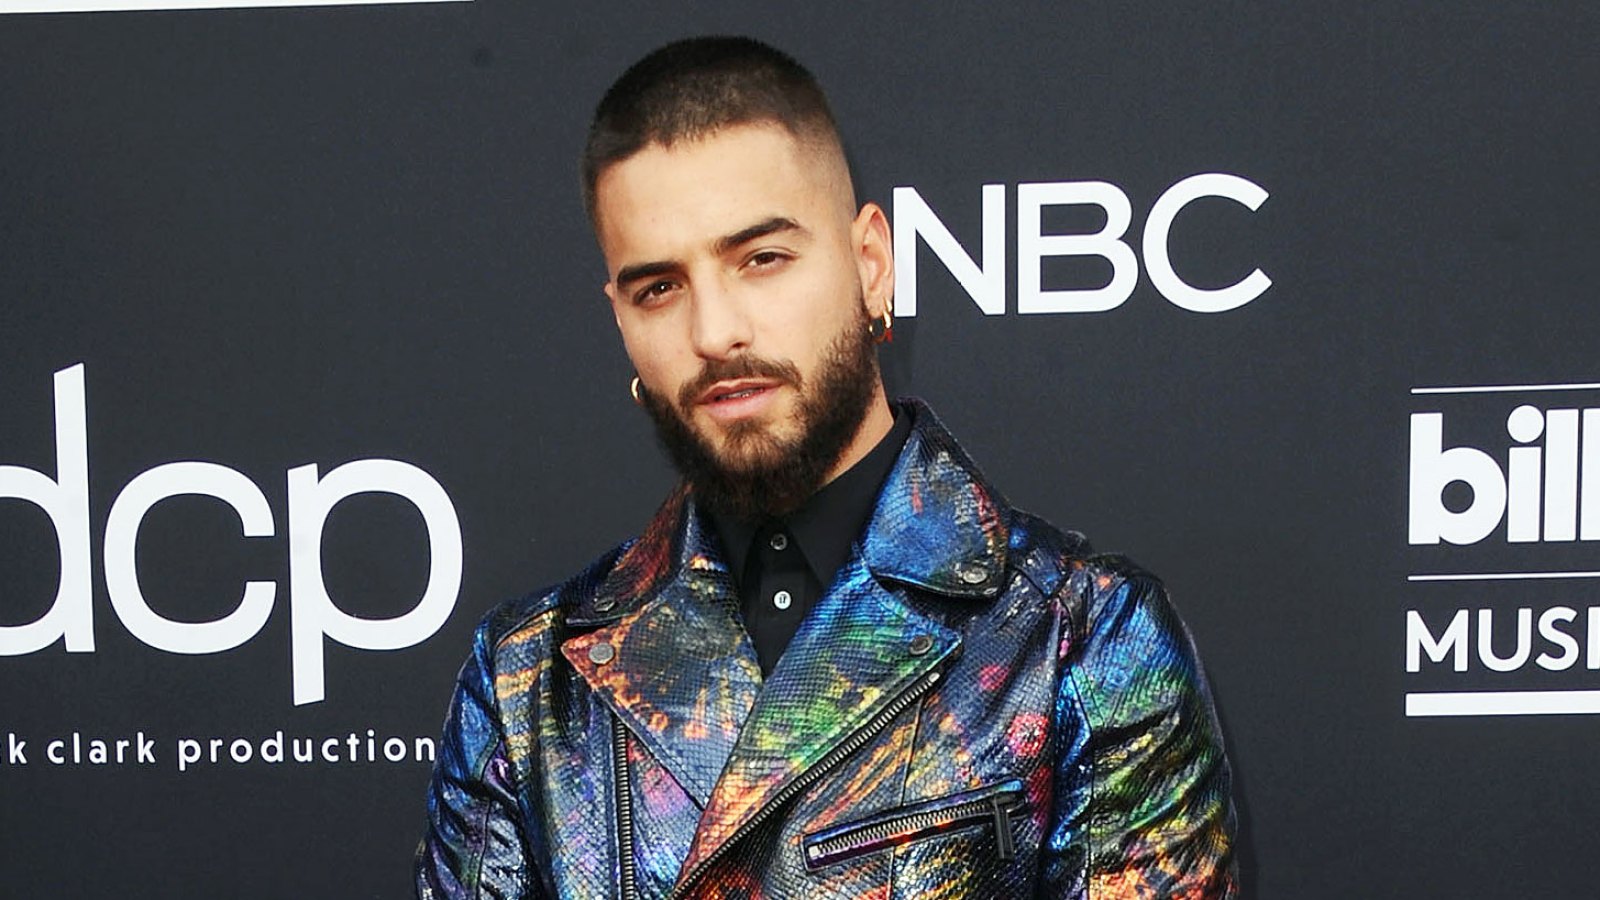 The One Thing Maluma Wants All of His Fans to Wear at His Concert